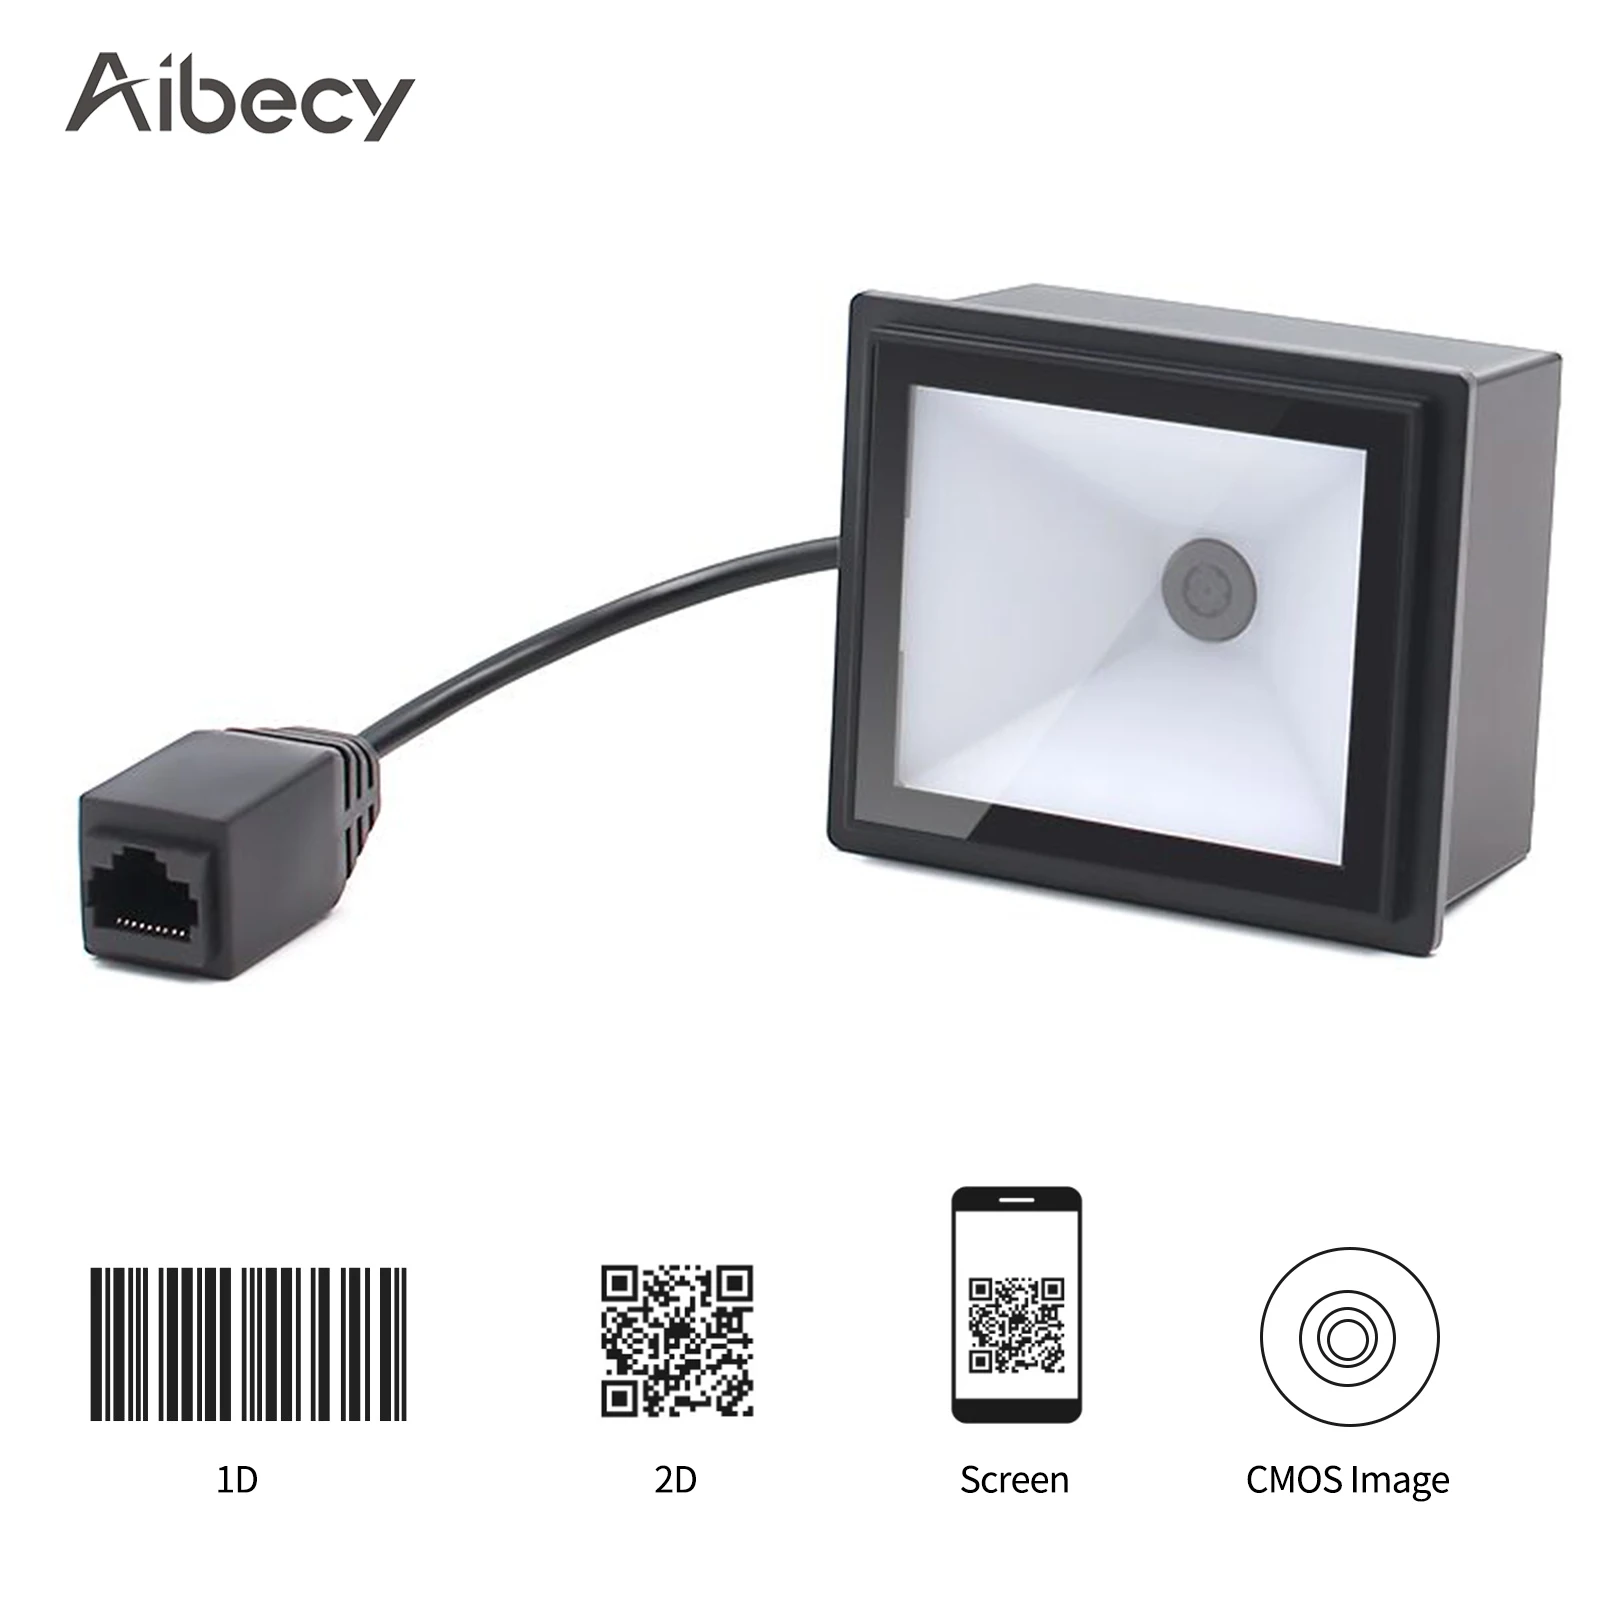 

Aibecy Embedded 1D 2D QR Barcode Scanner Module CMOS Images Auto-scan Wired Fixed Mount Bar Code Reader Support Screen Scan